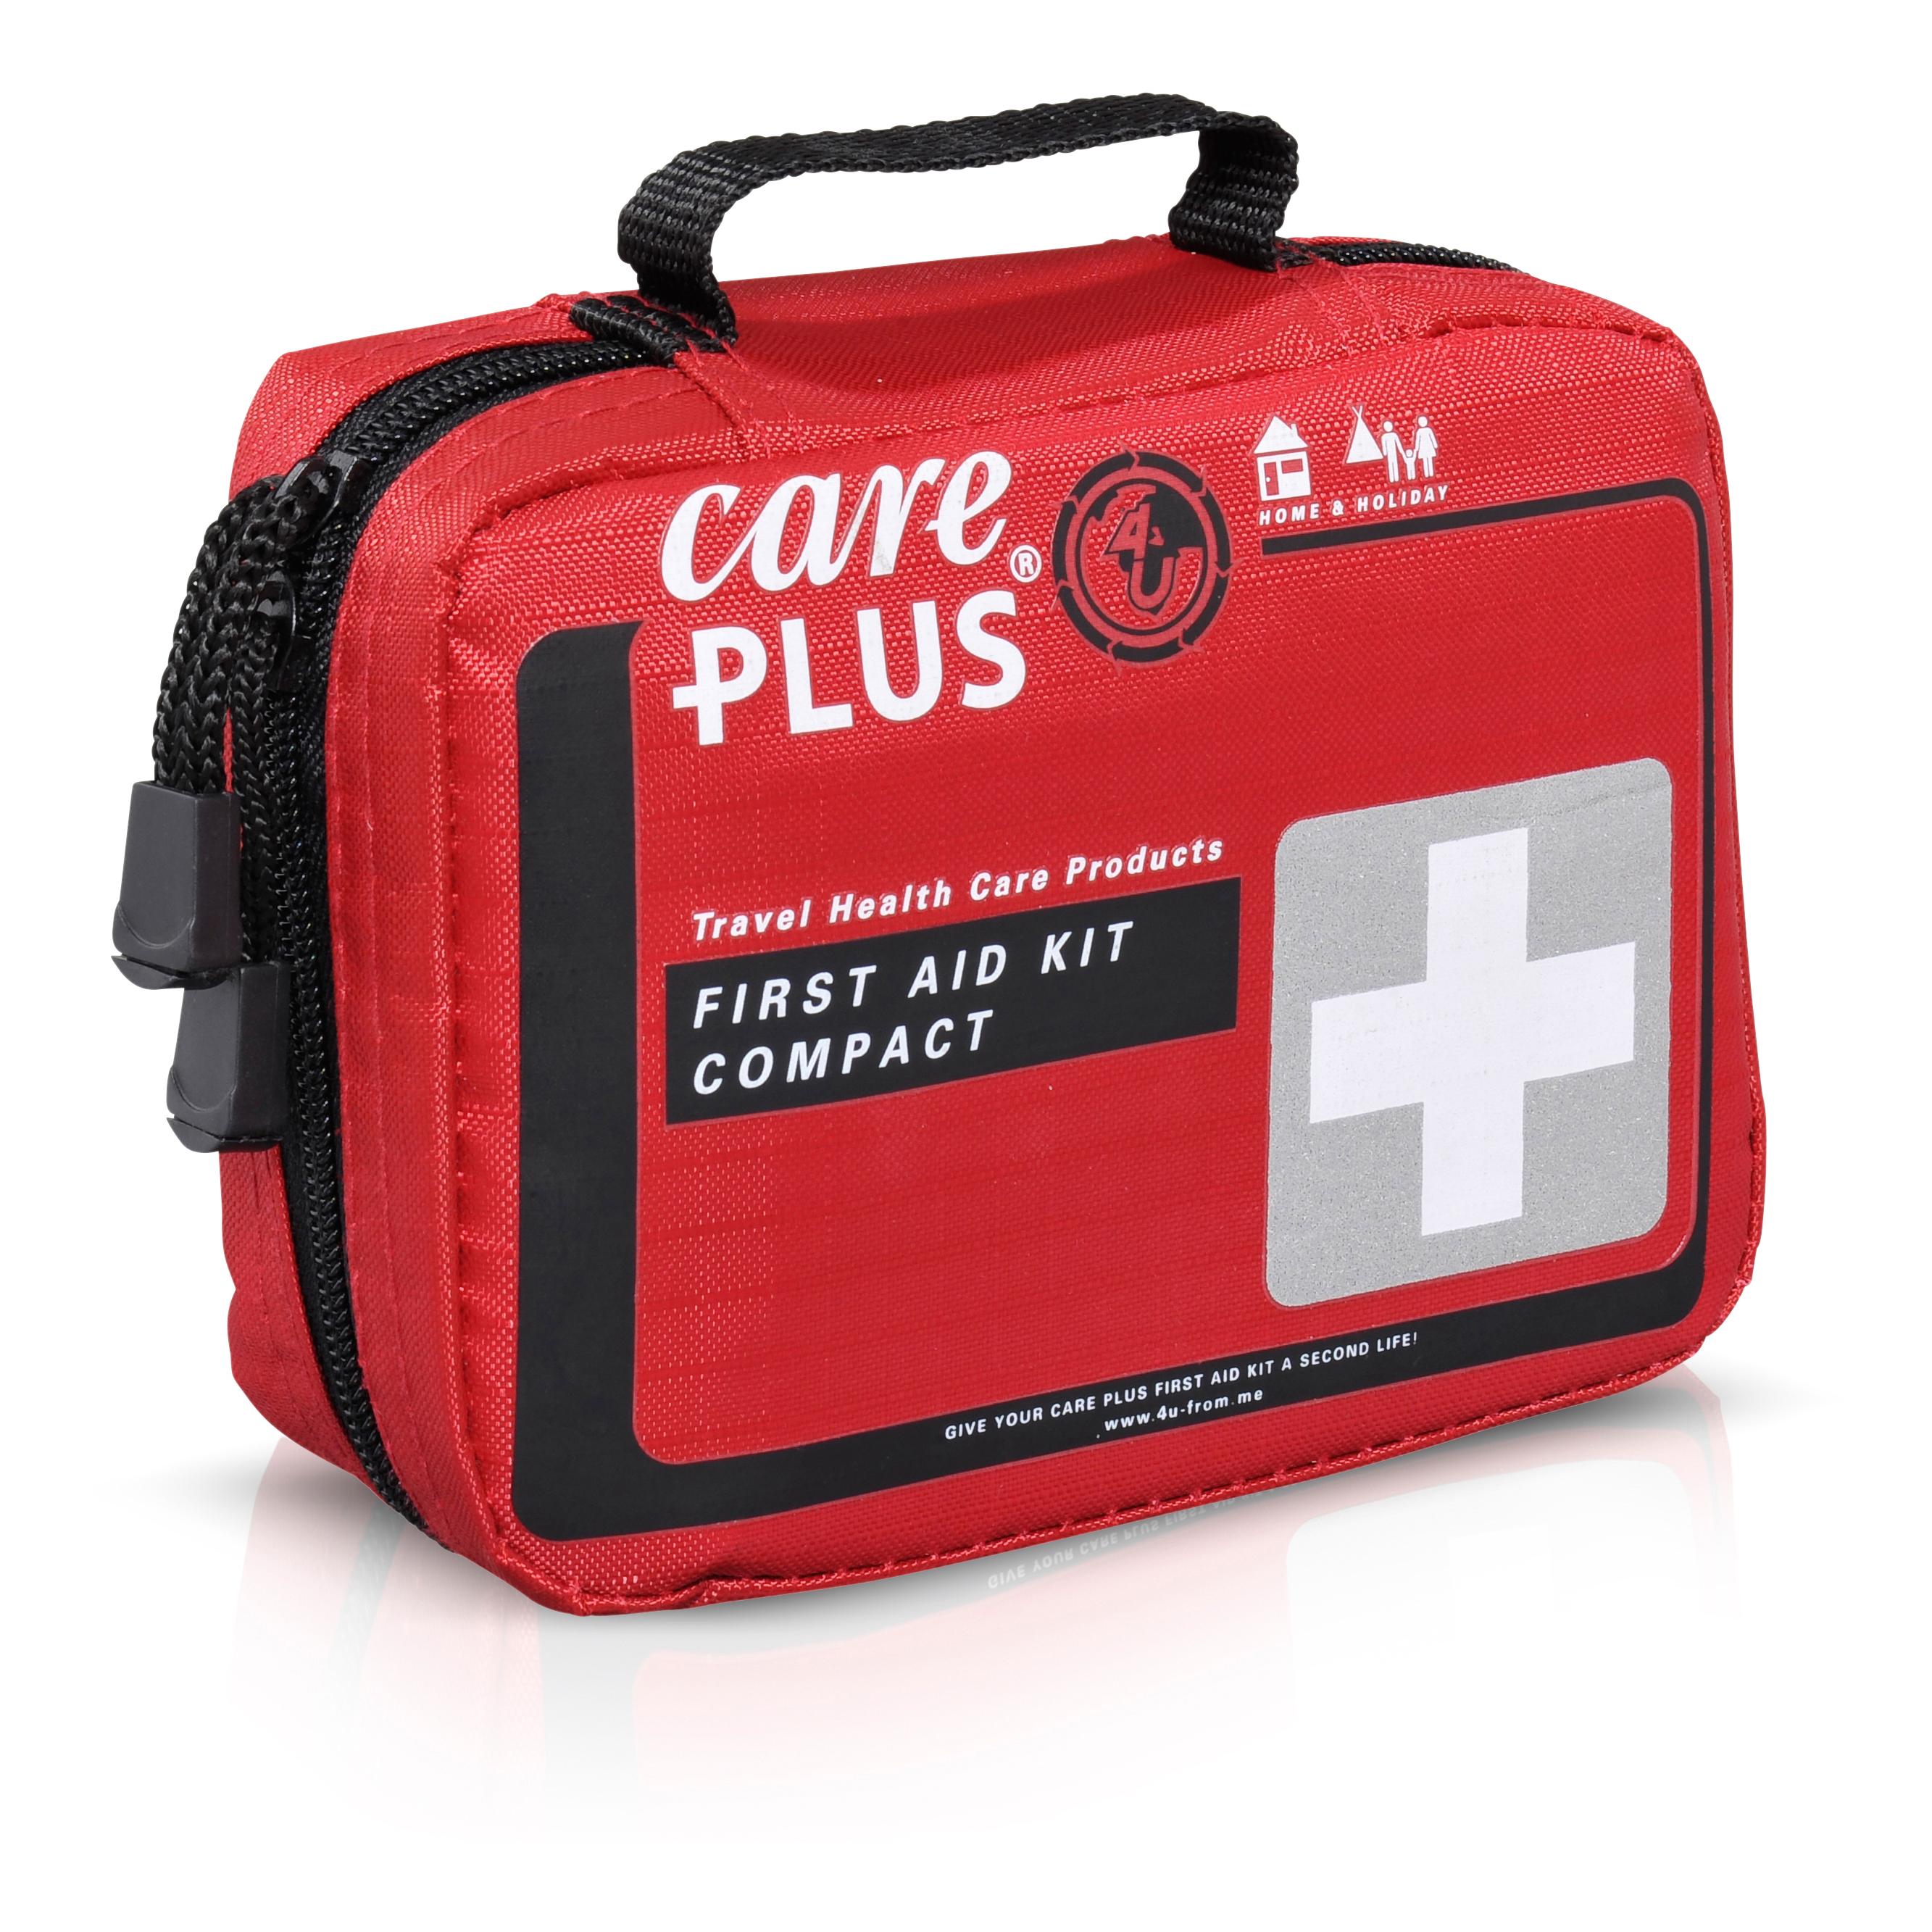 Care Plus First Aid Kit - Compact Rouge 